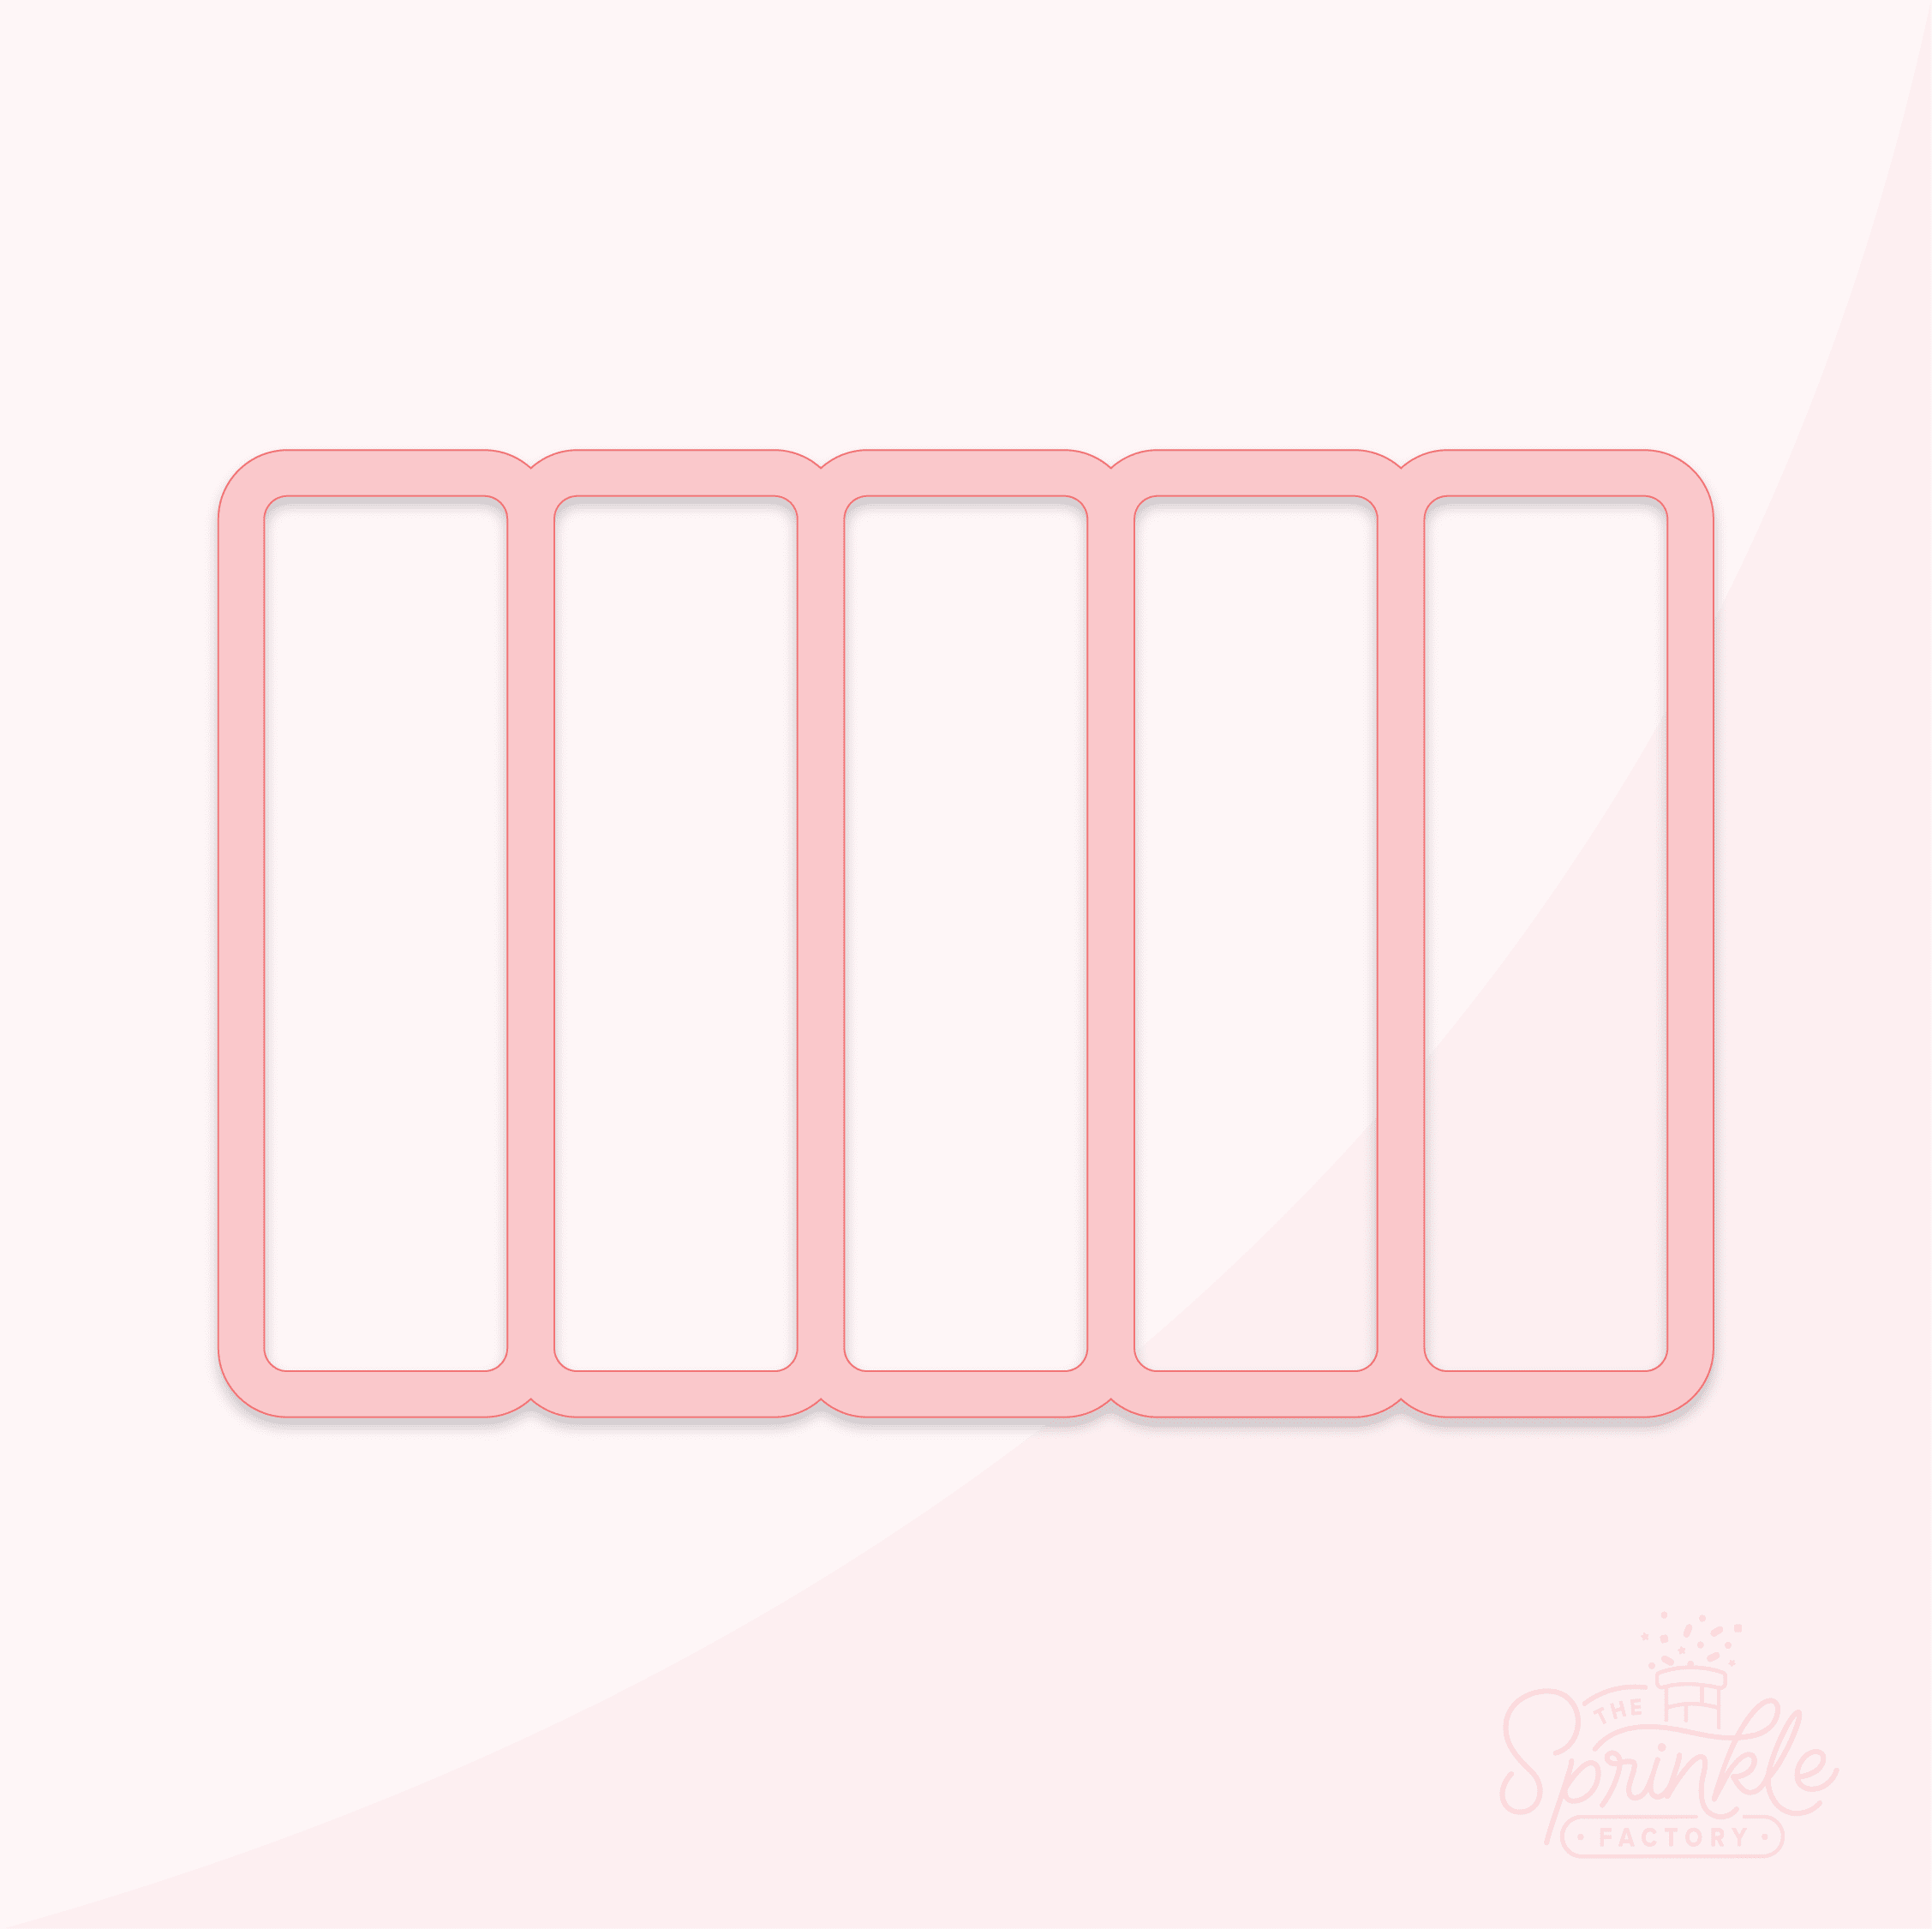 Clipart of pink cookie stick multi cutter.